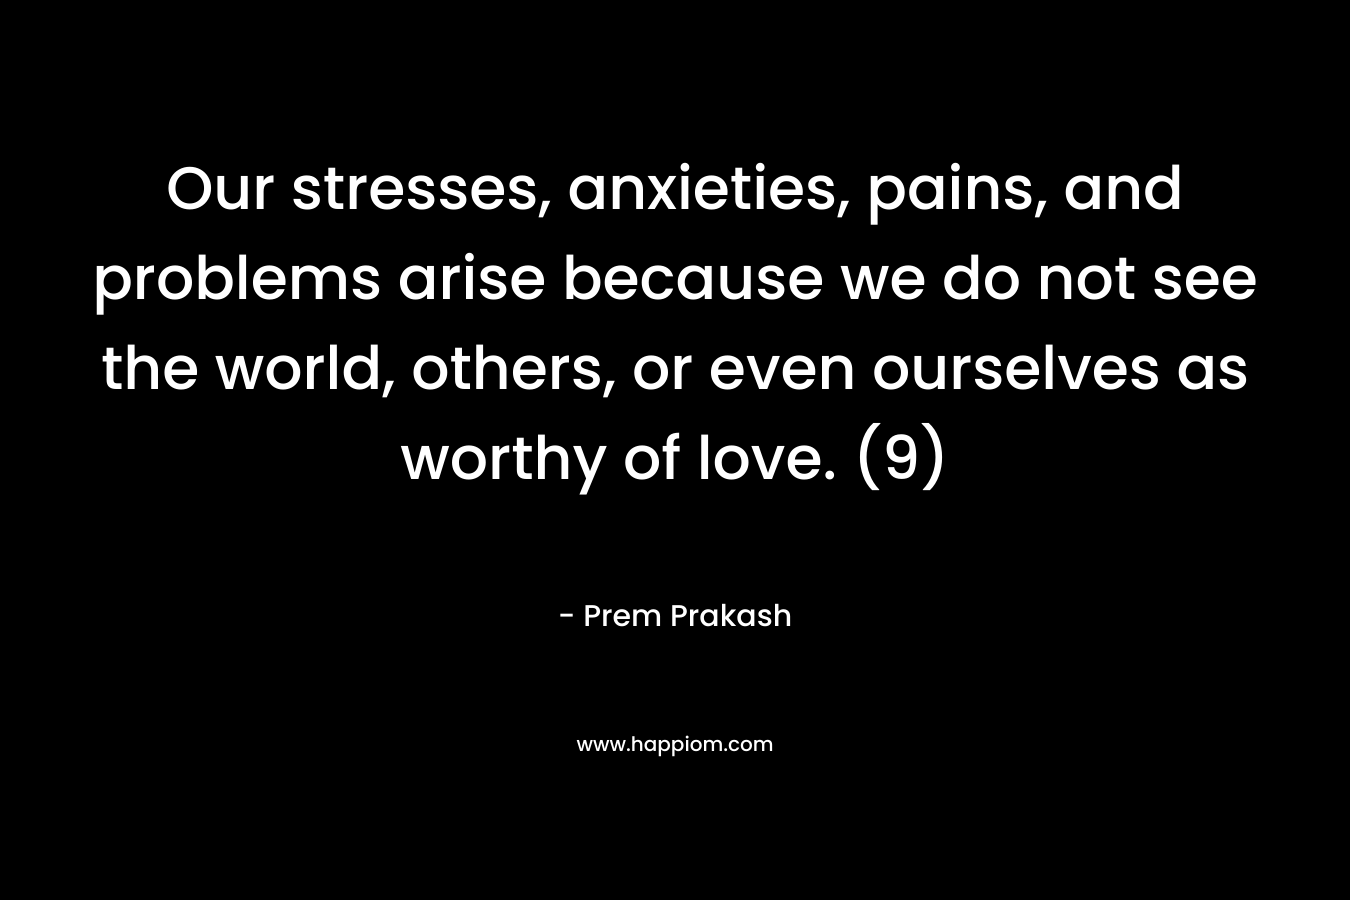 Our stresses, anxieties, pains, and problems arise because we do not see the world, others, or even ourselves as worthy of love. (9) – Prem Prakash